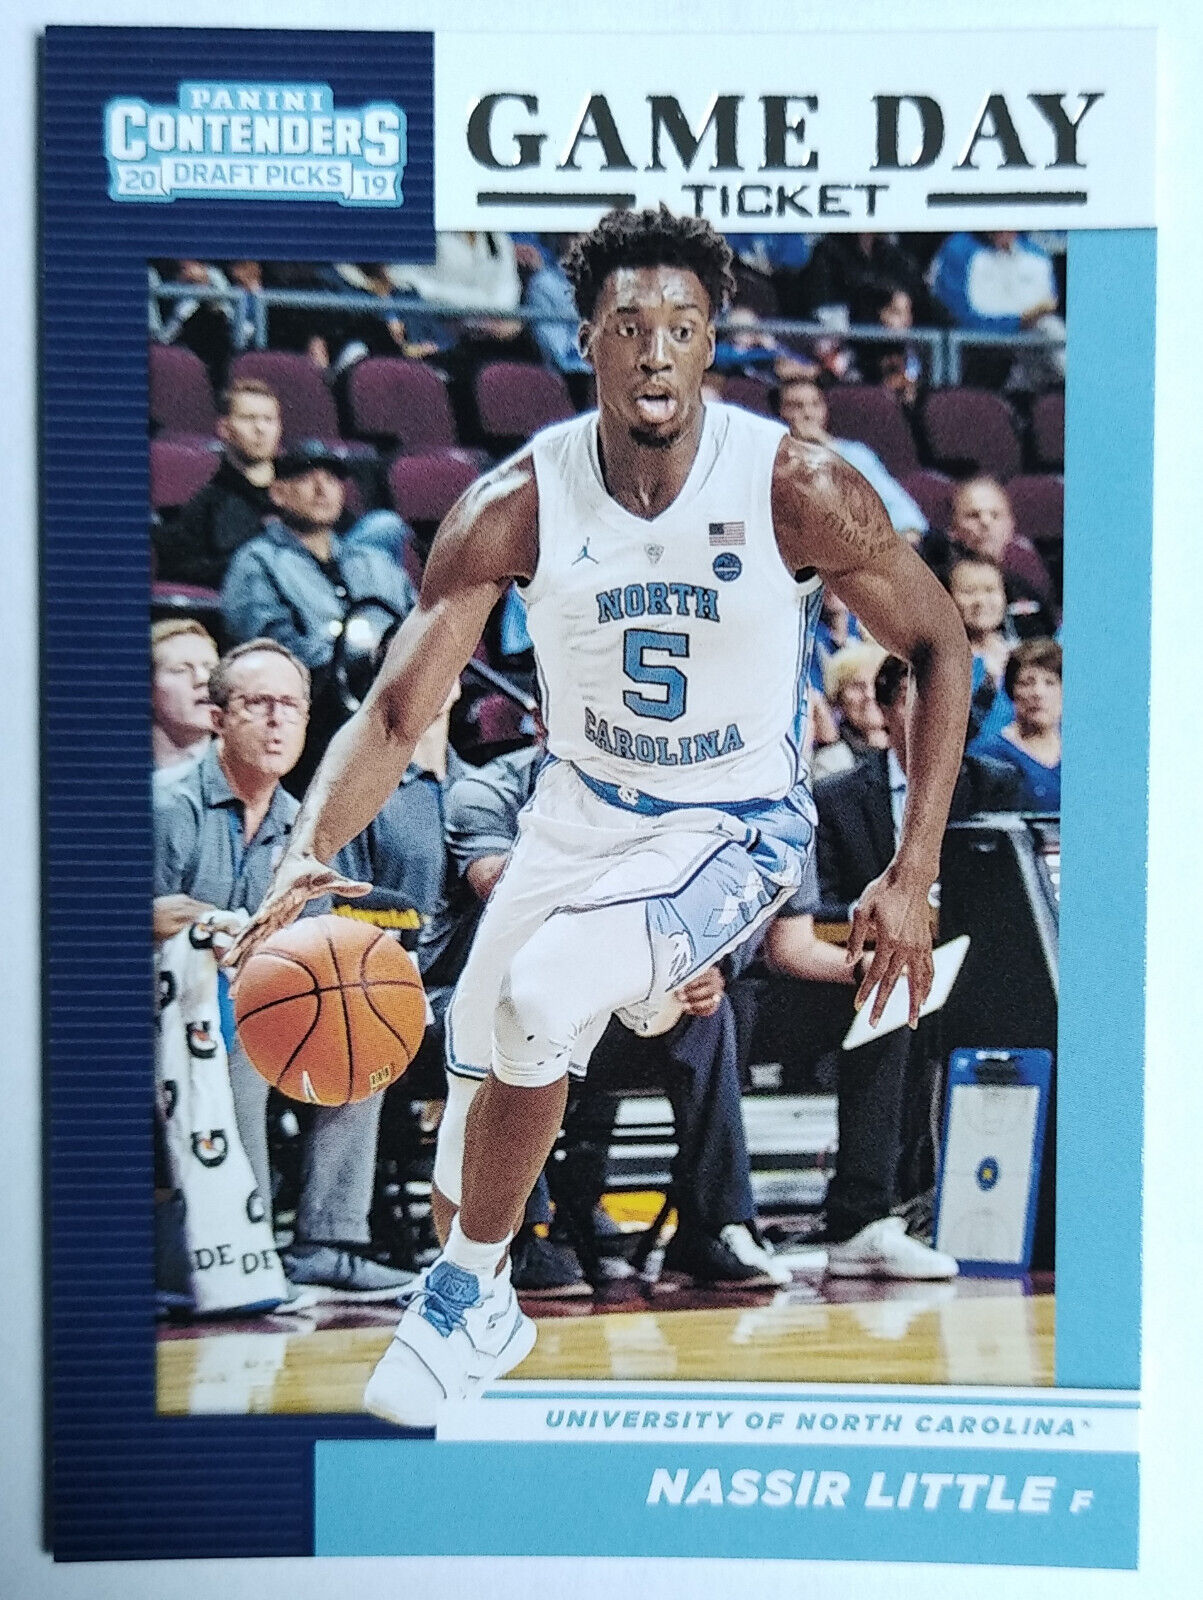 NASSIR LITTLE 12 PANINI CONTENDERS DRAFT PICKS GAME DAY TICKET ROOKIE RC 2019-20